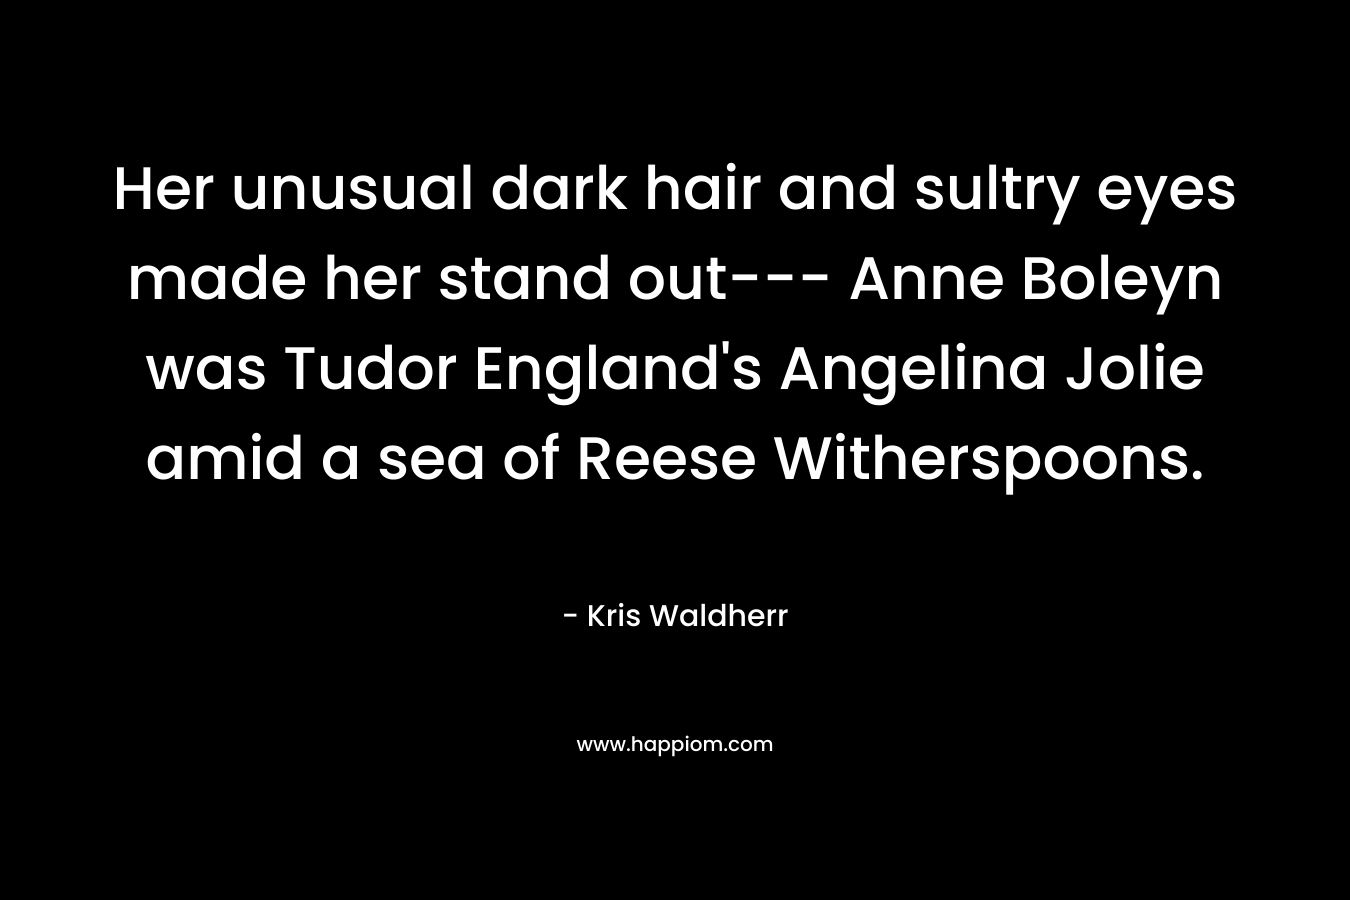 Her unusual dark hair and sultry eyes made her stand out— Anne Boleyn was Tudor England’s Angelina Jolie amid a sea of Reese Witherspoons. – Kris Waldherr